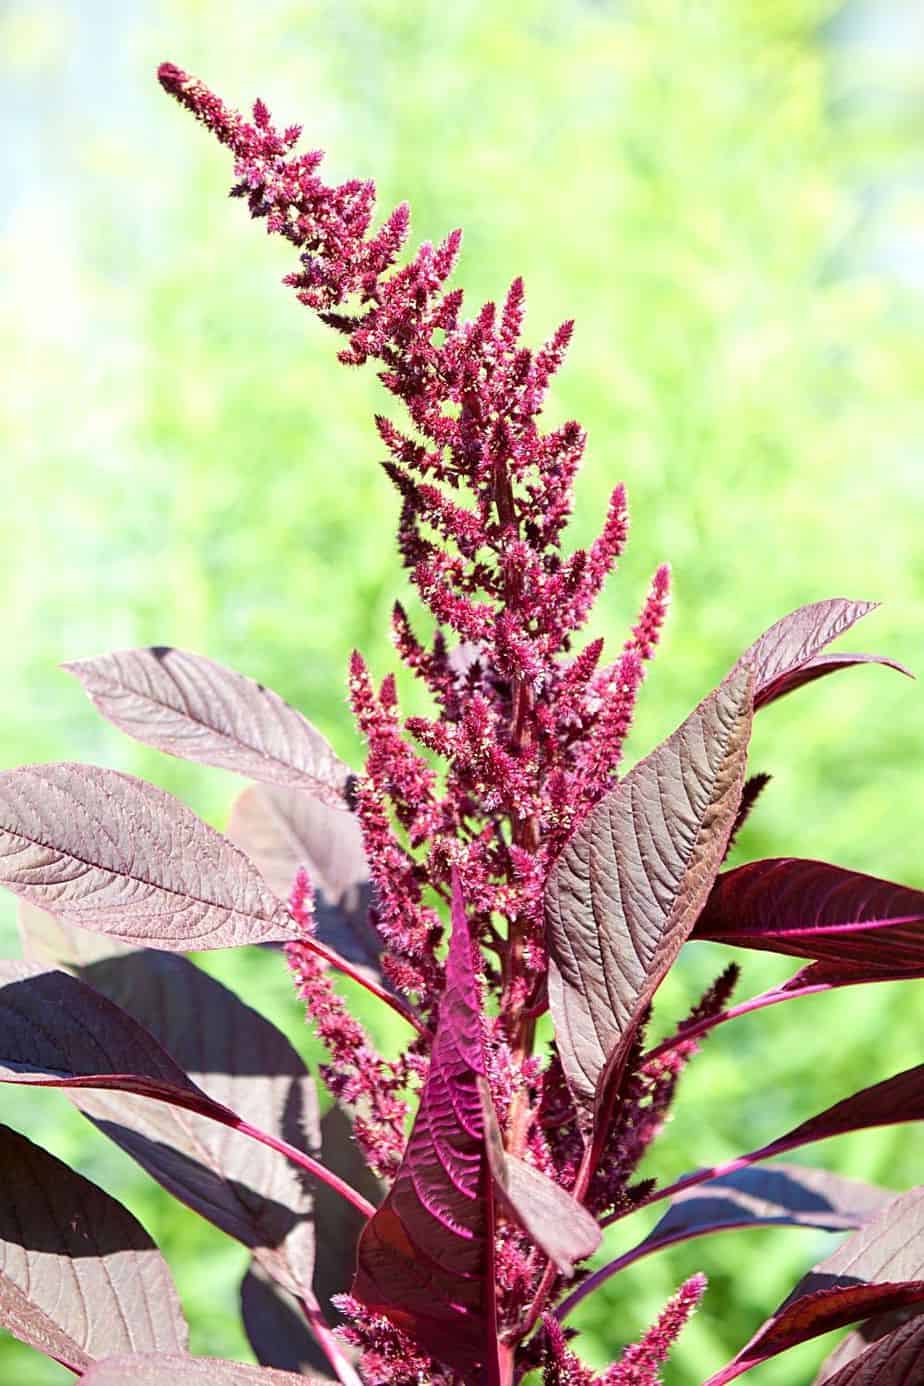 Amaranth is another great plant to grow for privacy and landscaping